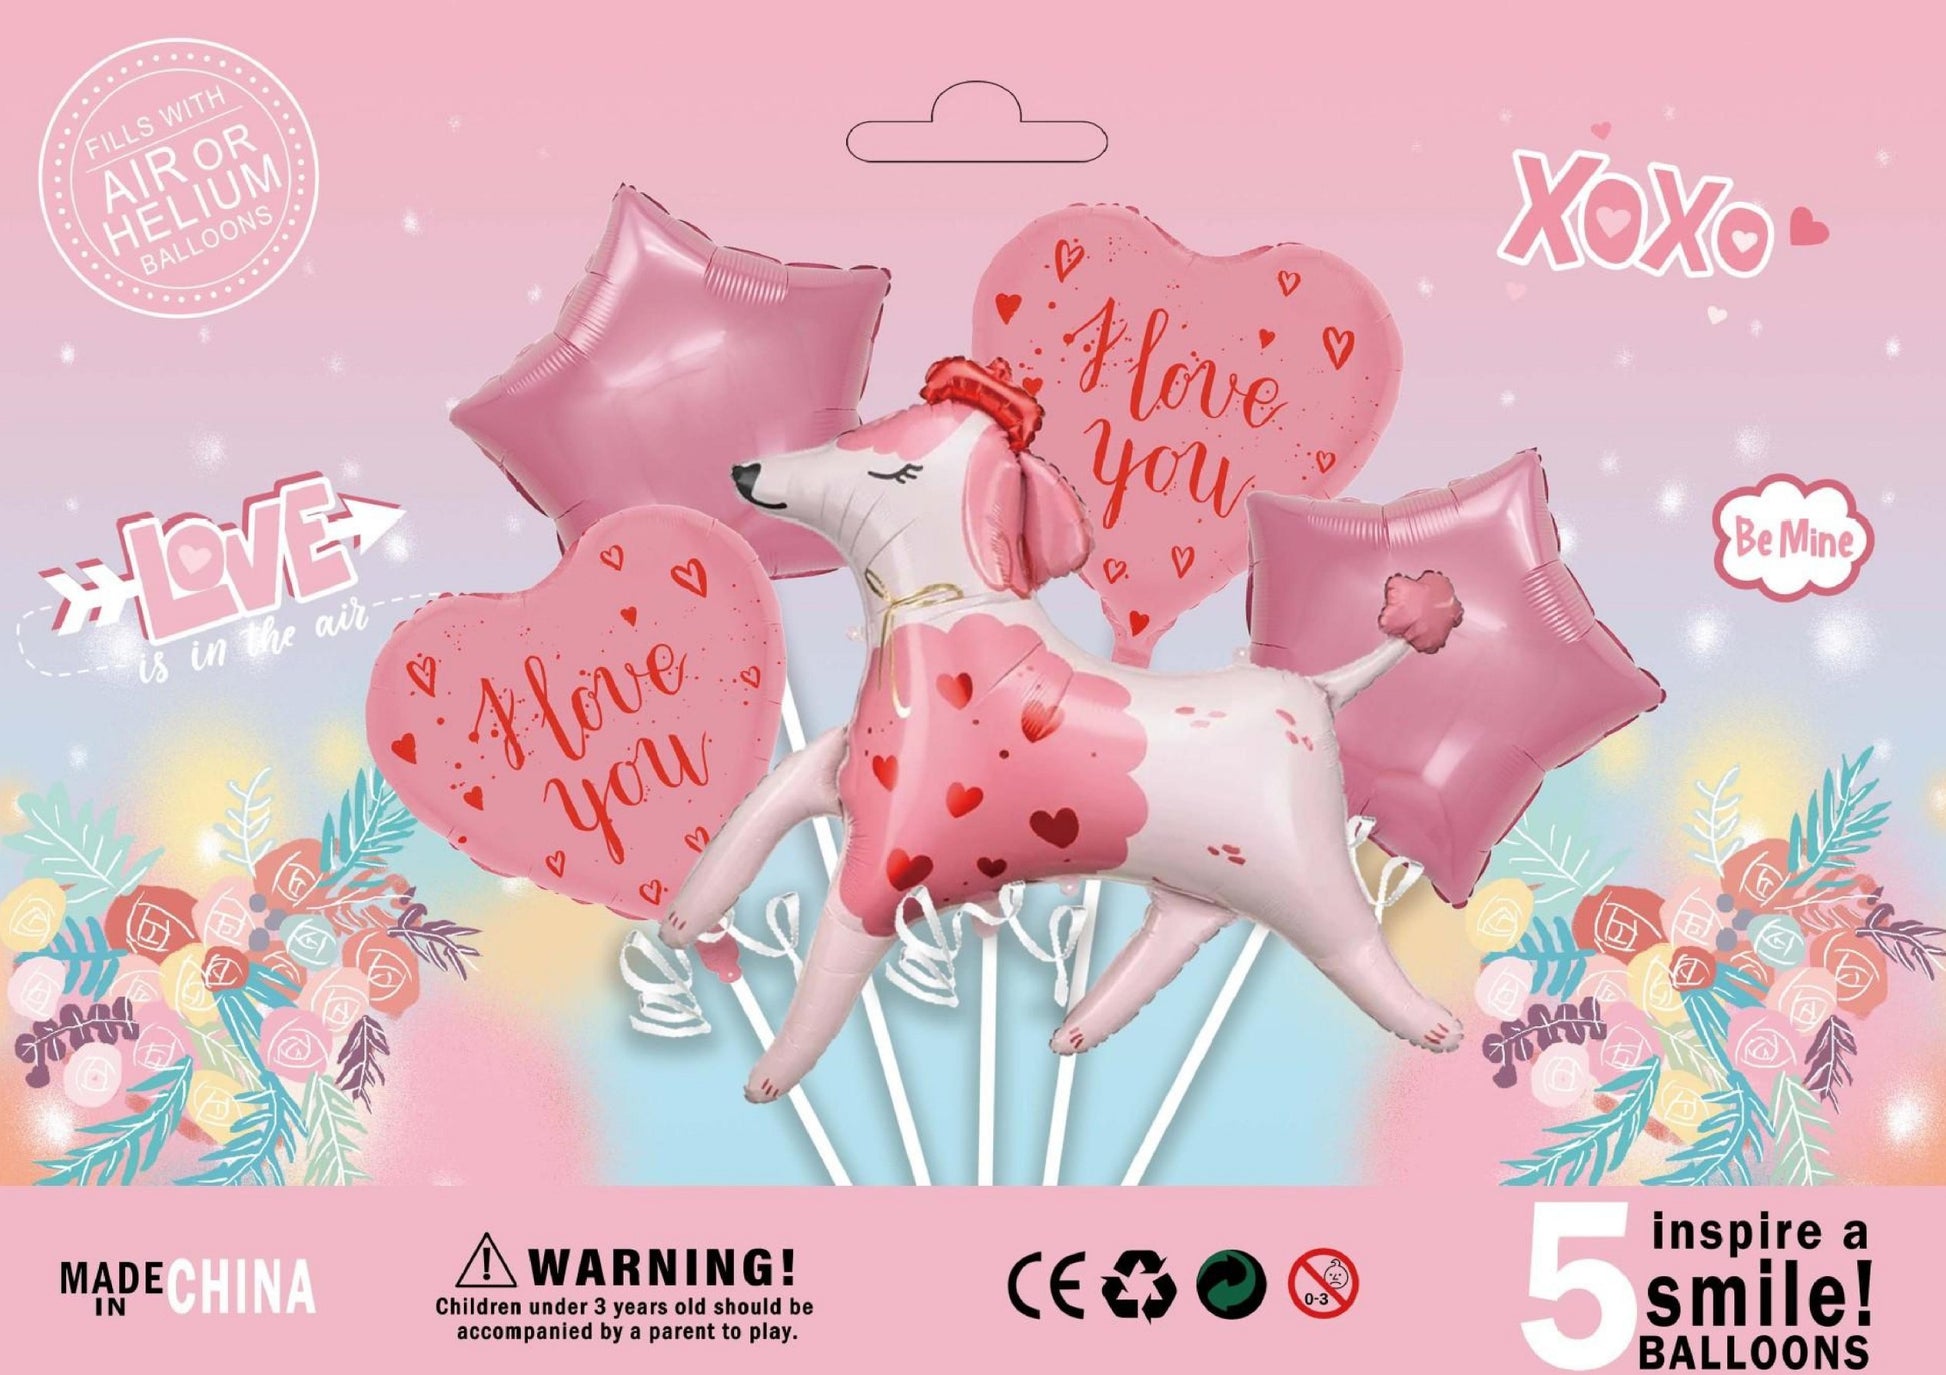 Cartoon Heart-shaped Party Decorations Aluminum Foil Balloons with Poodle Design and Creative Nordic Style for Weddings